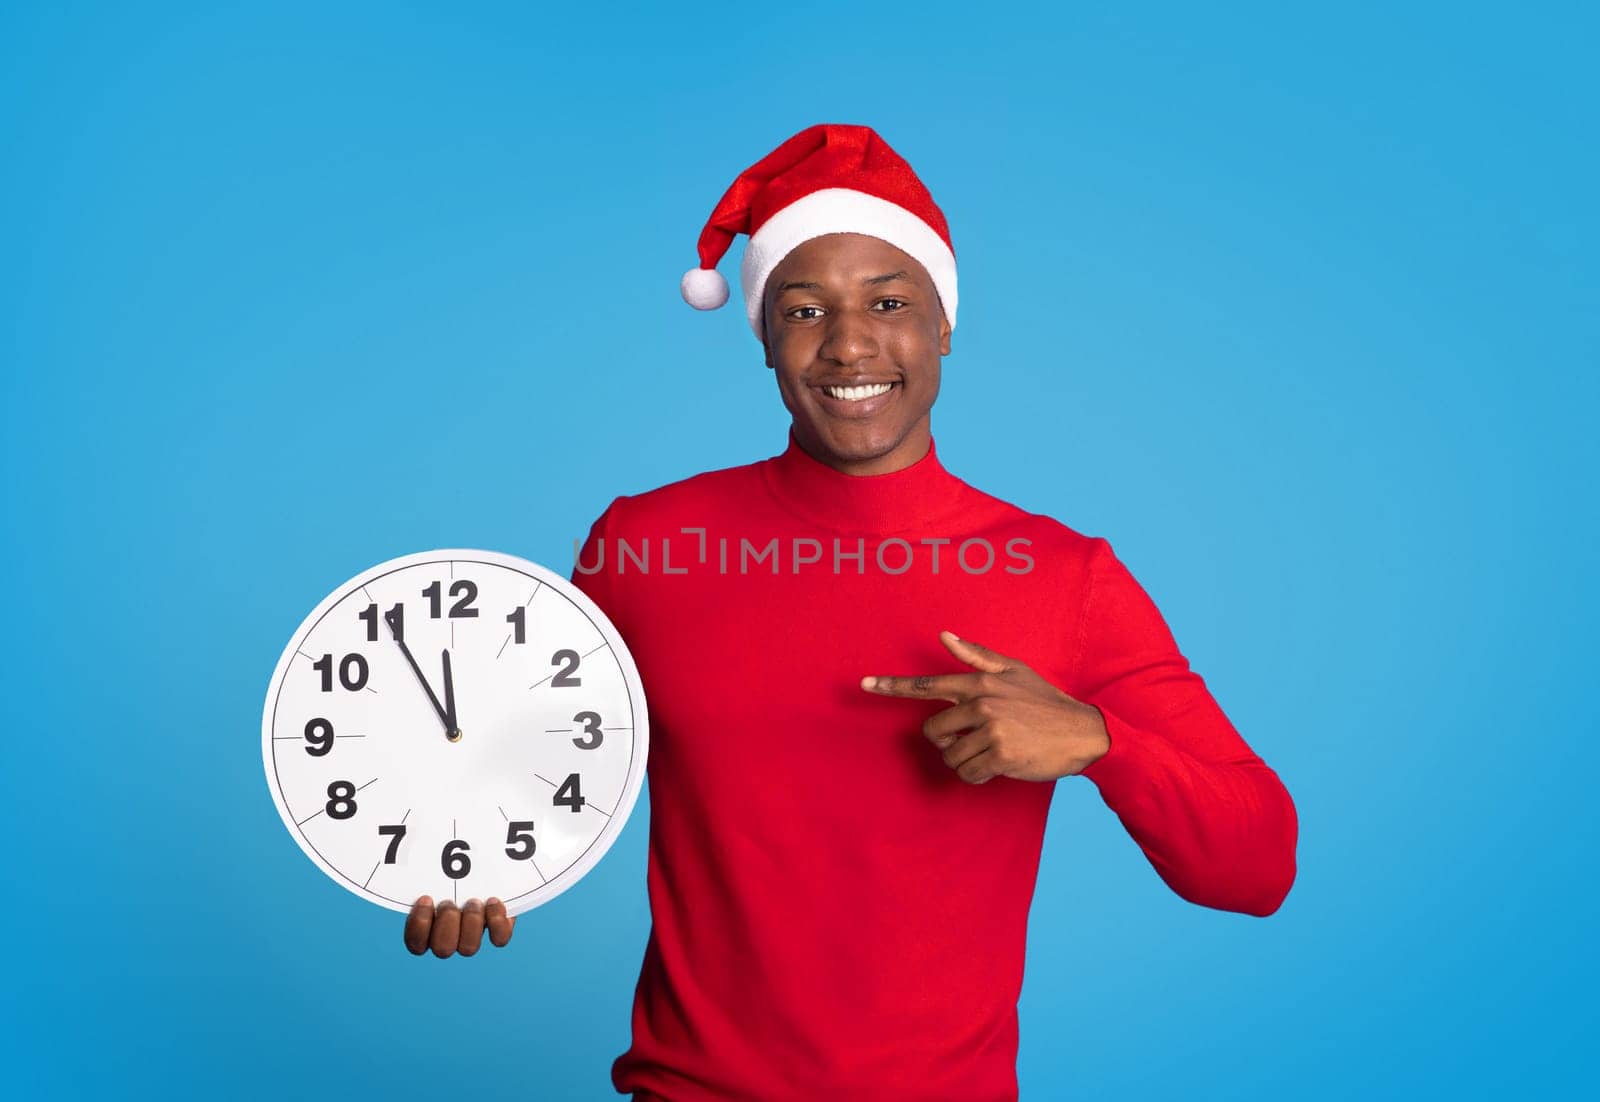 Black Man In Festive Santa Hat Pointing Finger At Clock Standing Against Blue Backdrop In Studio, Counting Down Minutes To Upcoming Year. Excitement Of Christmas And New Year Festivities